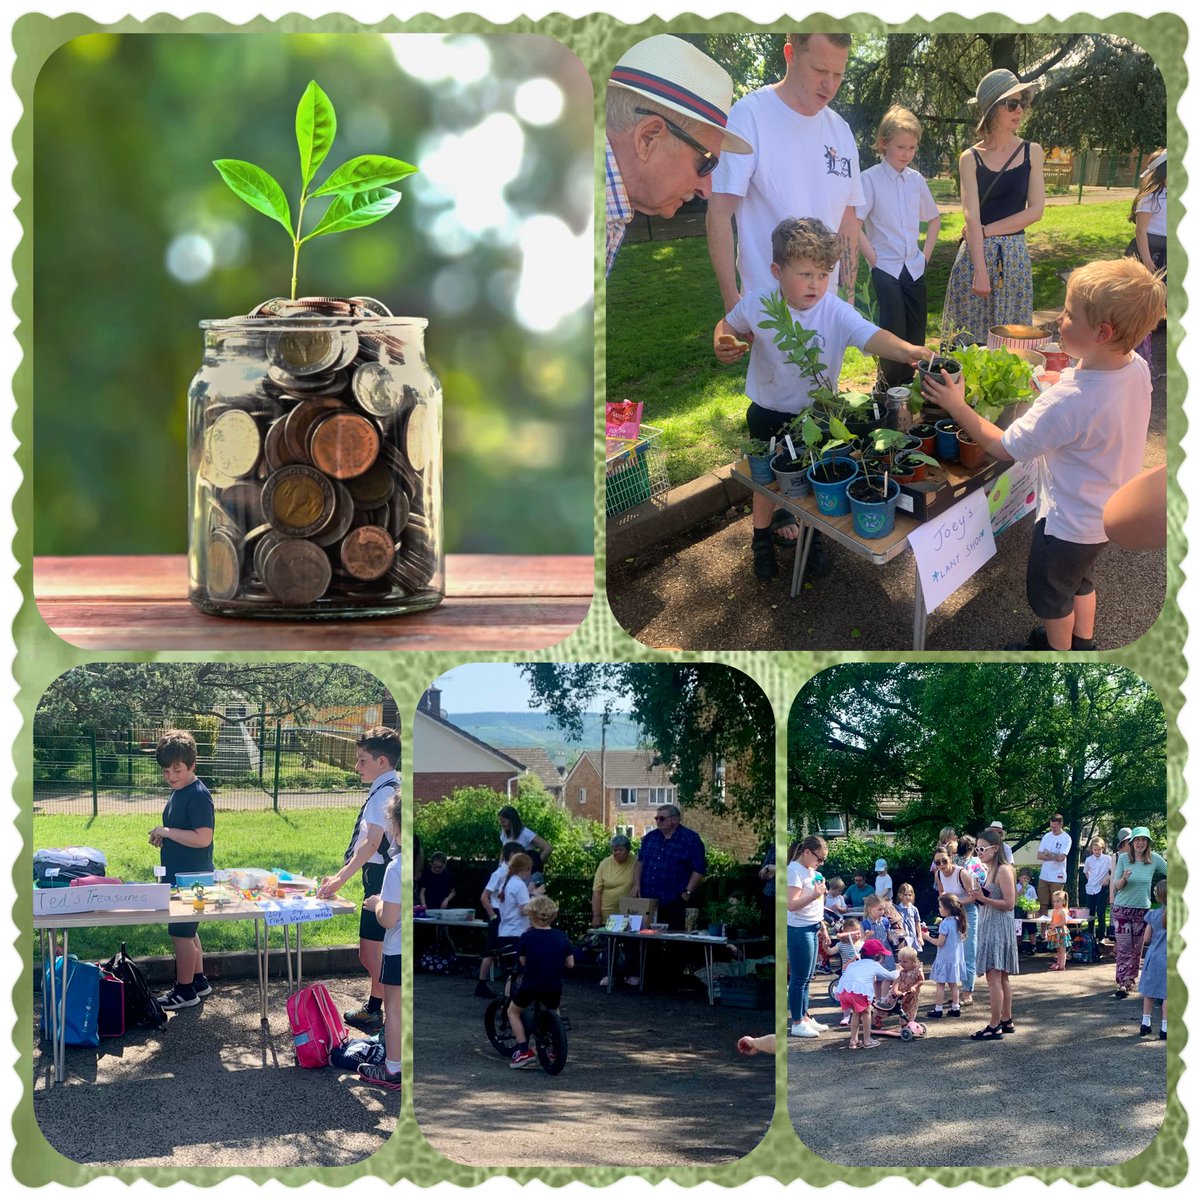 Thank you to everybody who joined our Grow A Pound Market! 🌟 The ingenious ideas and commitment to environmental recycling was truly inspiring. Special shoutout to our amazing PTFA for their hard work in organising. #GrowAPoundChallenge #YoungEntrepreneurs #EcoFriendlyBusiness